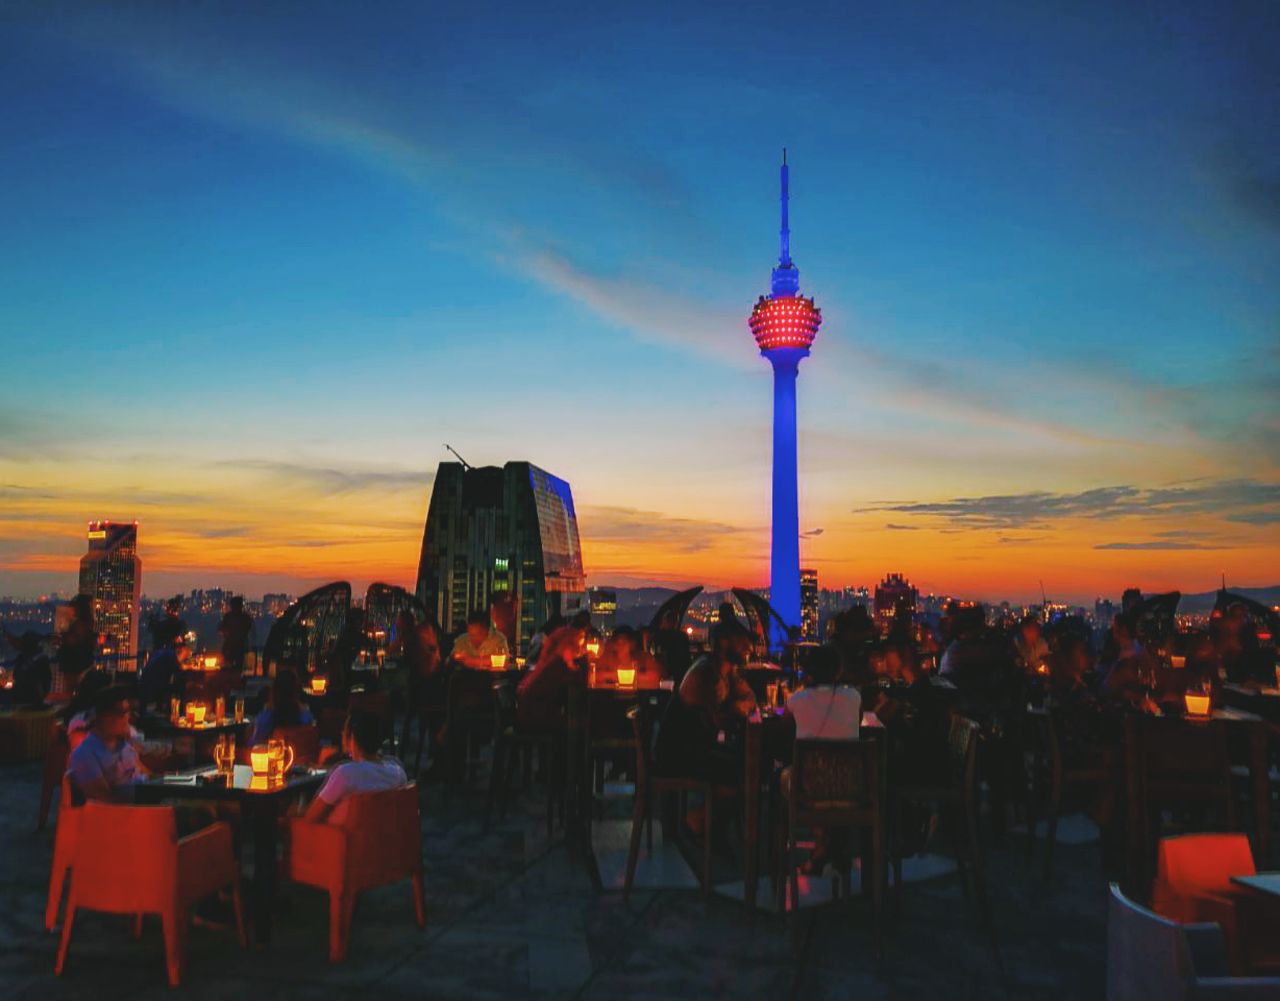 <strong>Heli Lounge Bar: </strong>The working helipad on the rooftop of Menara KH moonlights as Heli Lounge Bar from 6 p.m. every evening -- unless it rains. You can enjoy a 360-degree view of the city as the sun sets, unfettered by even safety barriers.